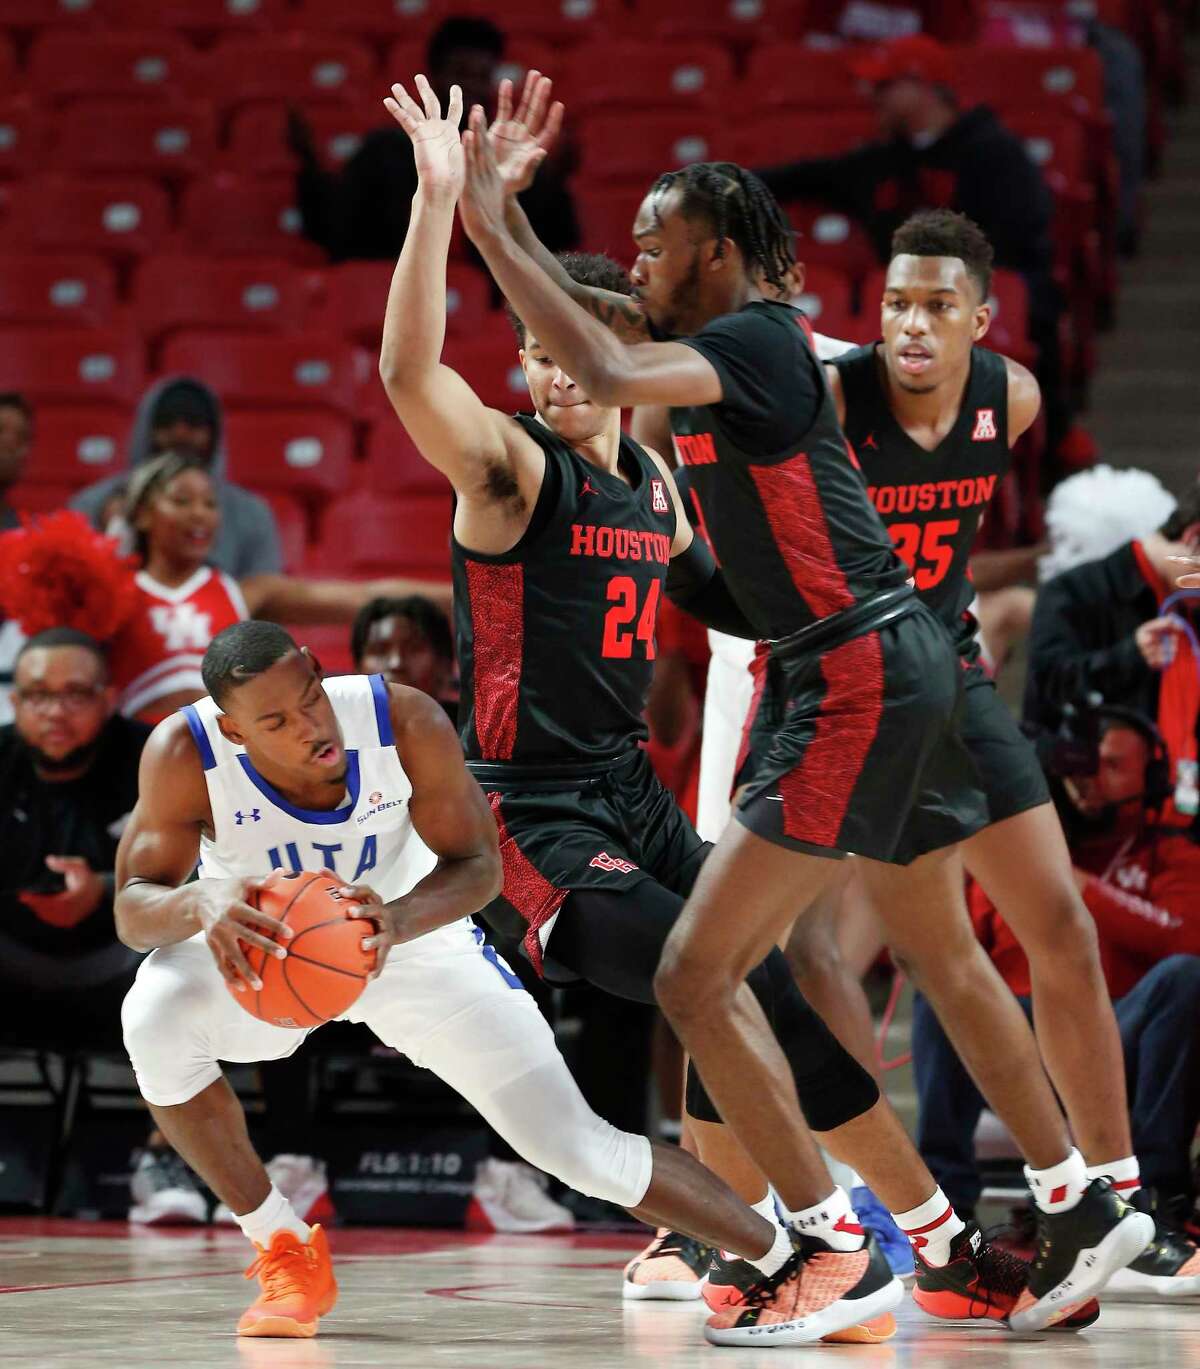 Texas-Arlington Mavericks guard David Azore (4) is met with a Houston Cougars guard Quentin Grimes (24), guard DeJon Jarreau (3) and forward Fabian White Jr. (35) during the first half of an NCAA basketball game at Fertitta Center Wednesday, Dec. 11, 2019, in Houston.